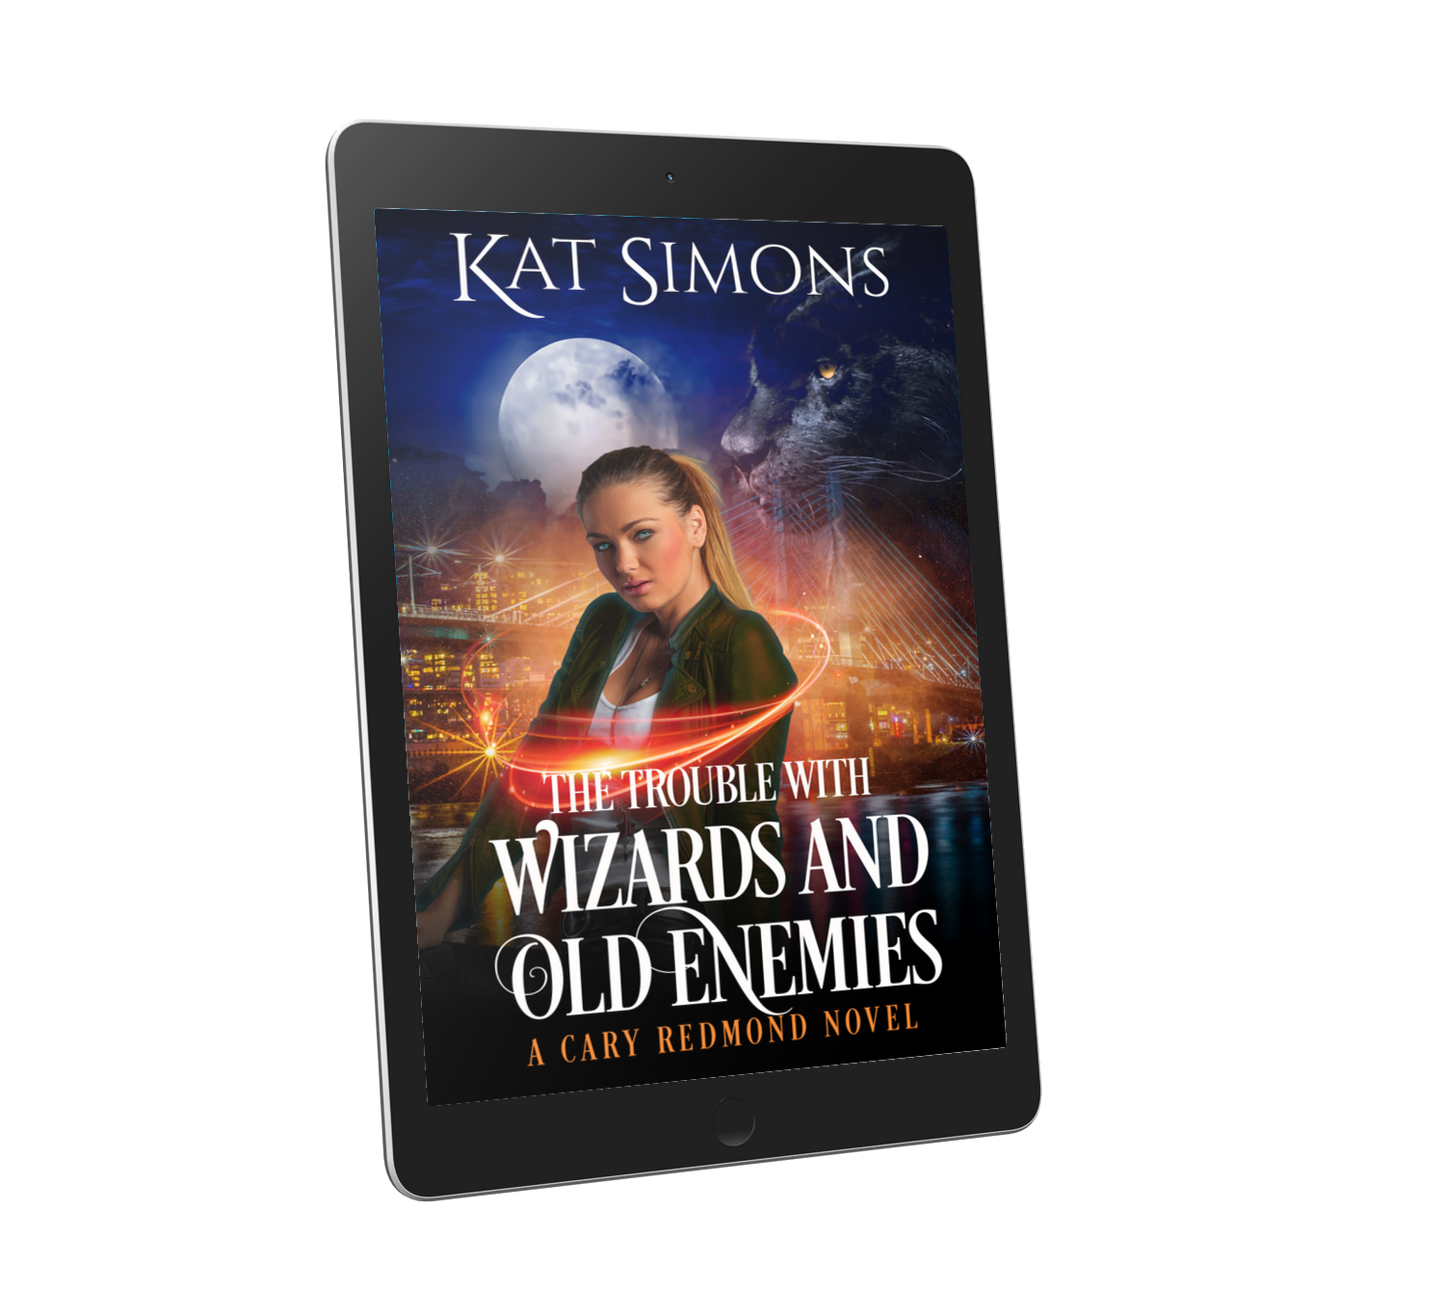 The Trouble with Wizards and Old Enemies